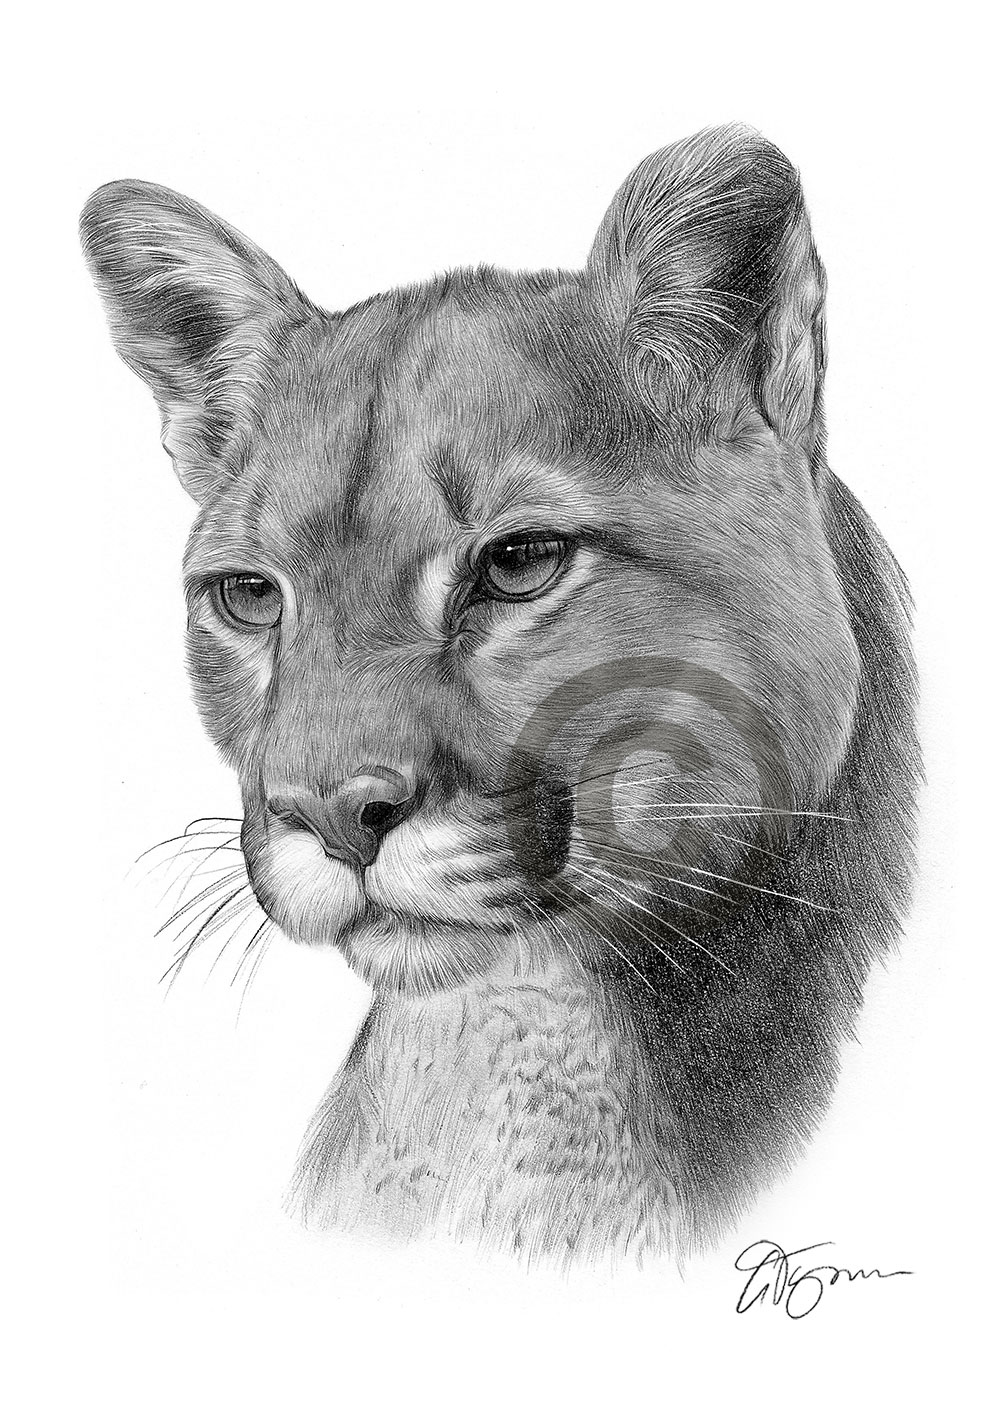 Pencil drawing of a cougar by artist Gary Tymon